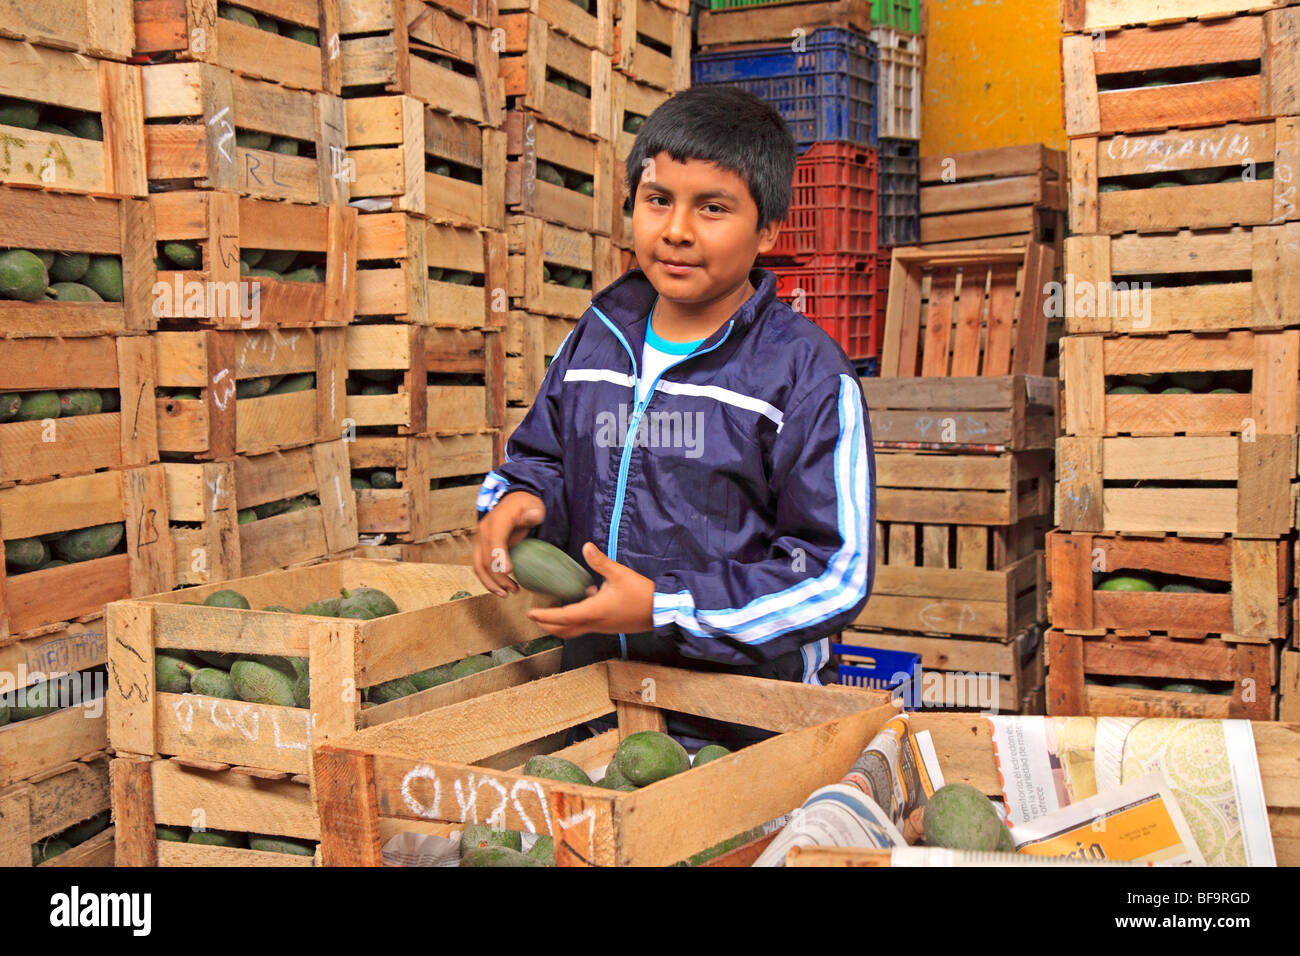 young boy working at a fruit market in Lima, Peru Stock Photo